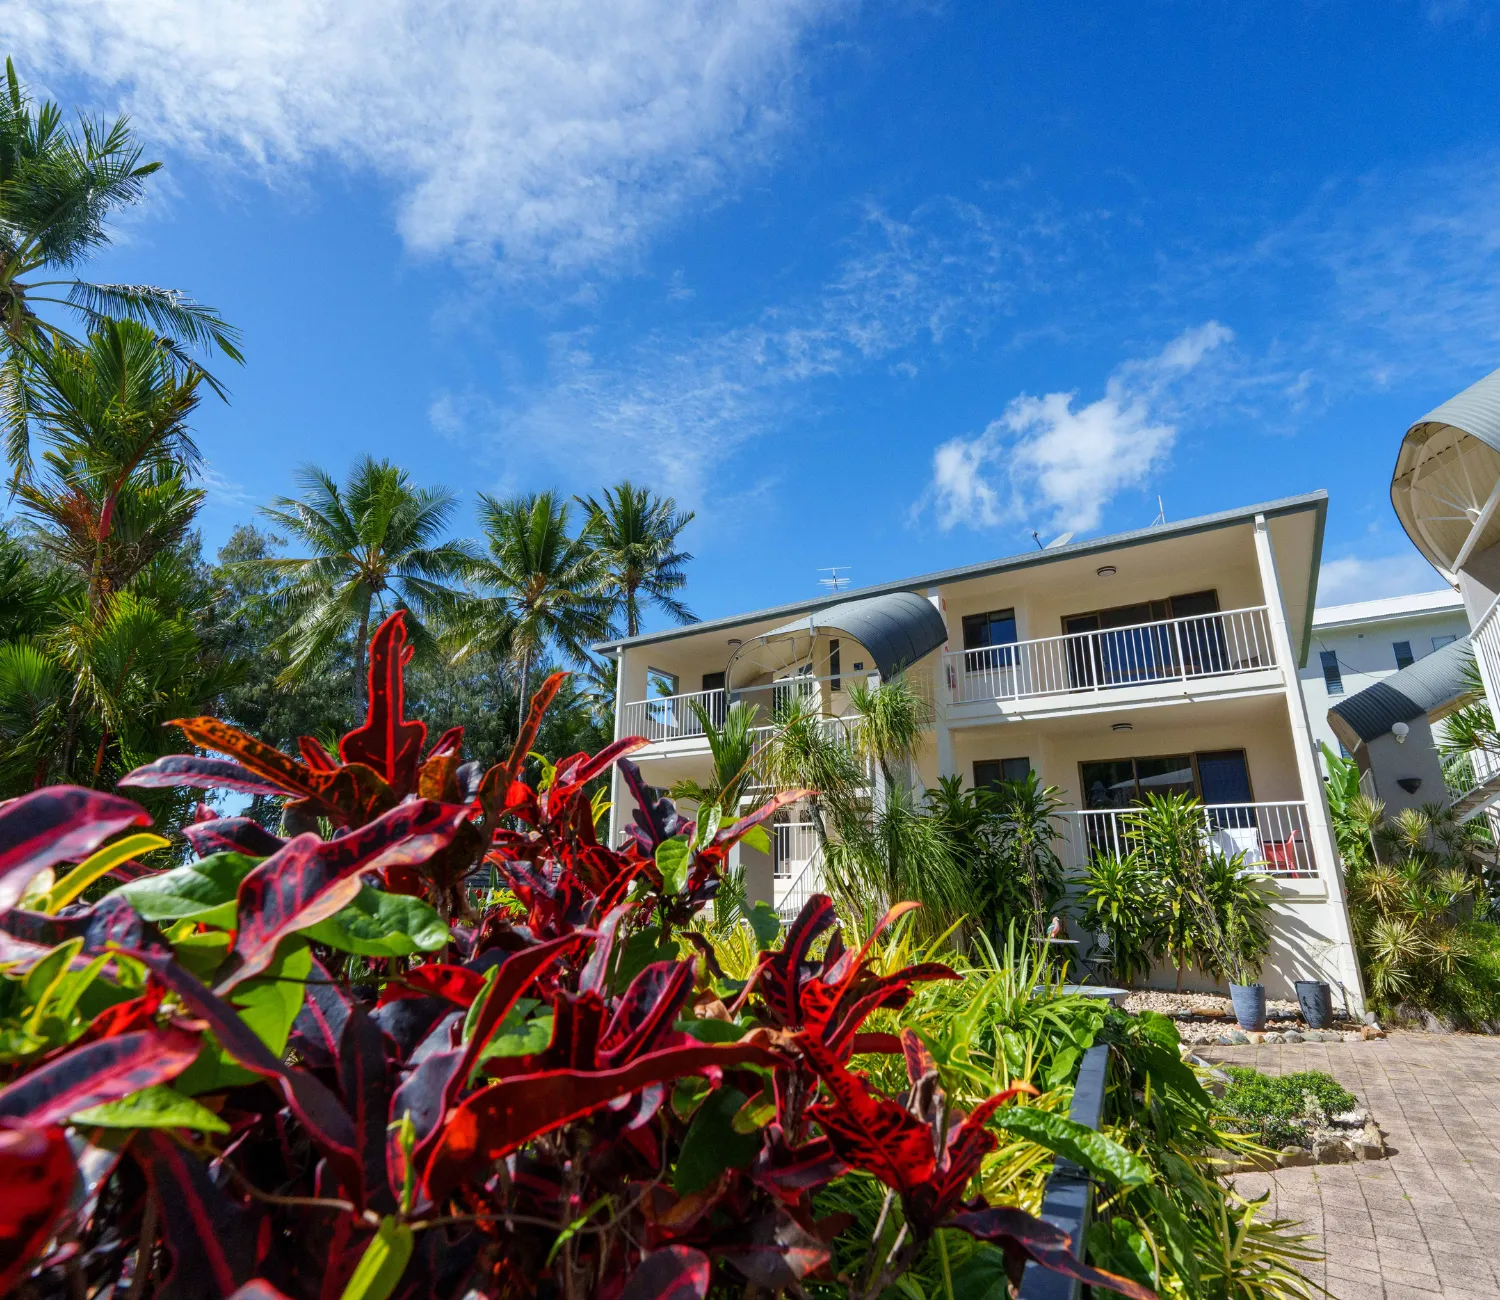 view of one of the apartment blocks at Melaleuca resort from below behind a garden